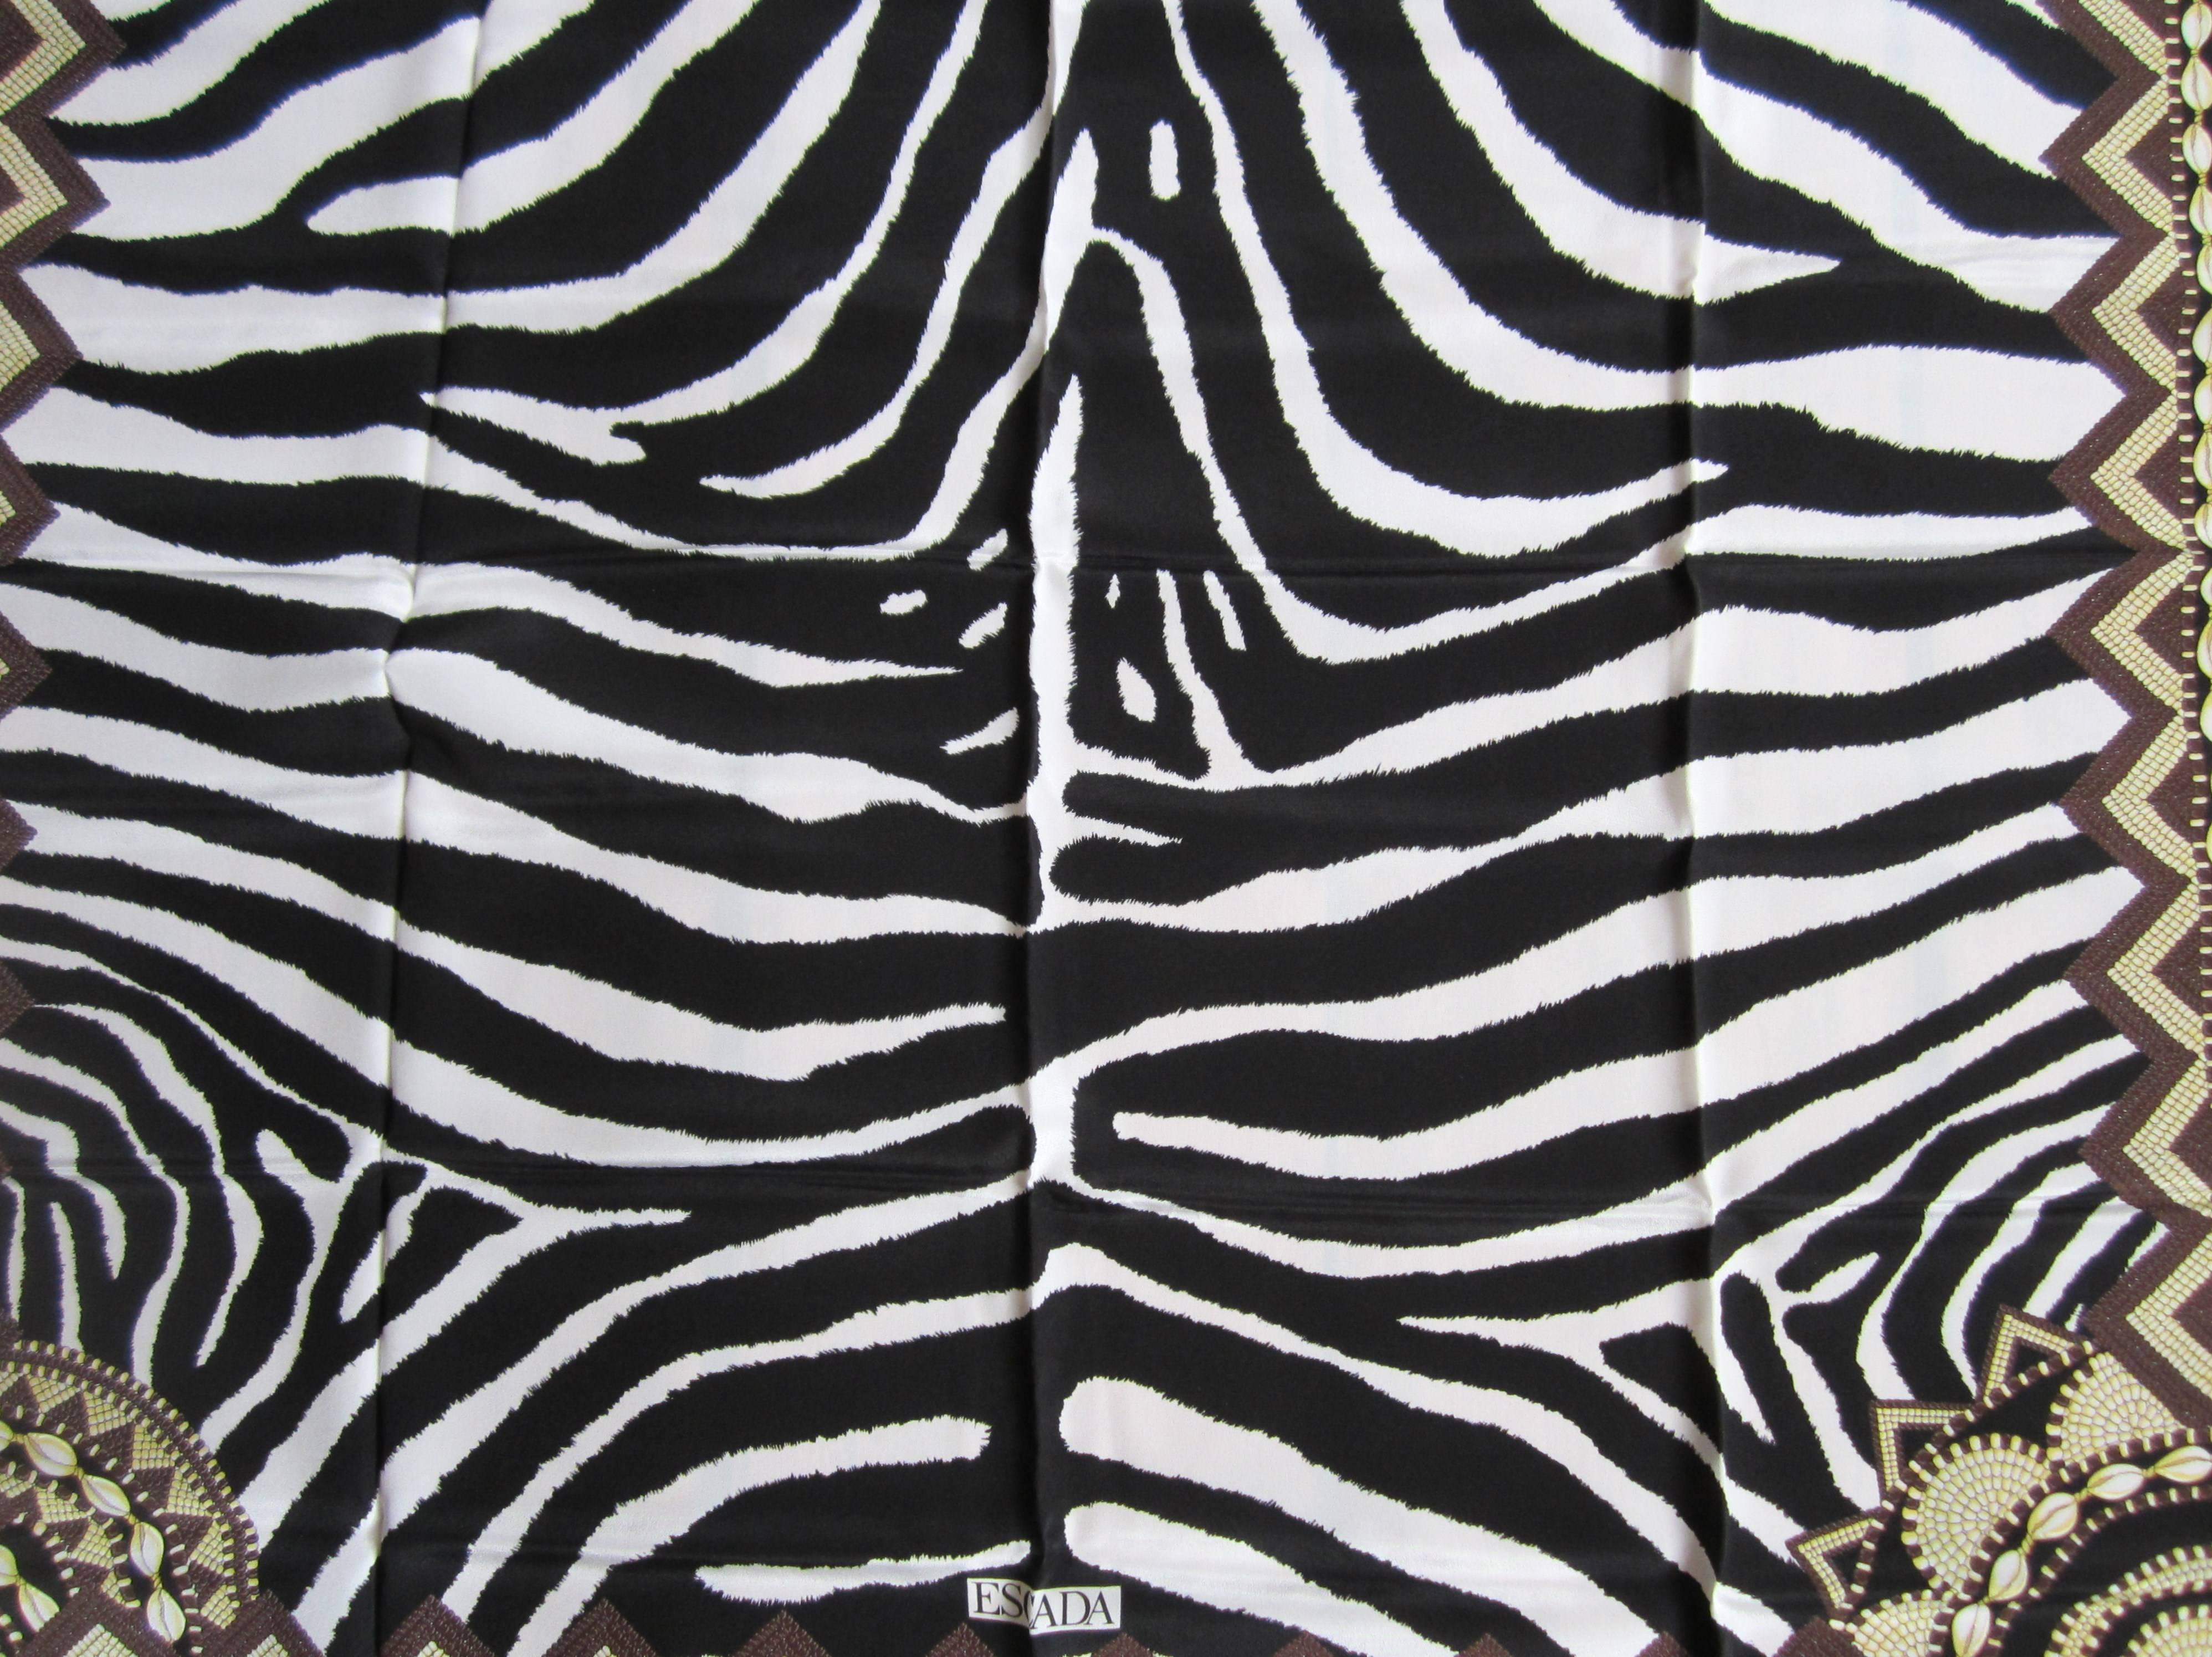 Silk Zebra Escada Scarf. Made in Italy. This was purchased in the late 80s or early 90s and stored away, never worn. From Neiman Marcus. Measuring 34 x 34 inches. This is out of a massive collection of Hopi, Zuni, Navajo, Southwestern, sterling